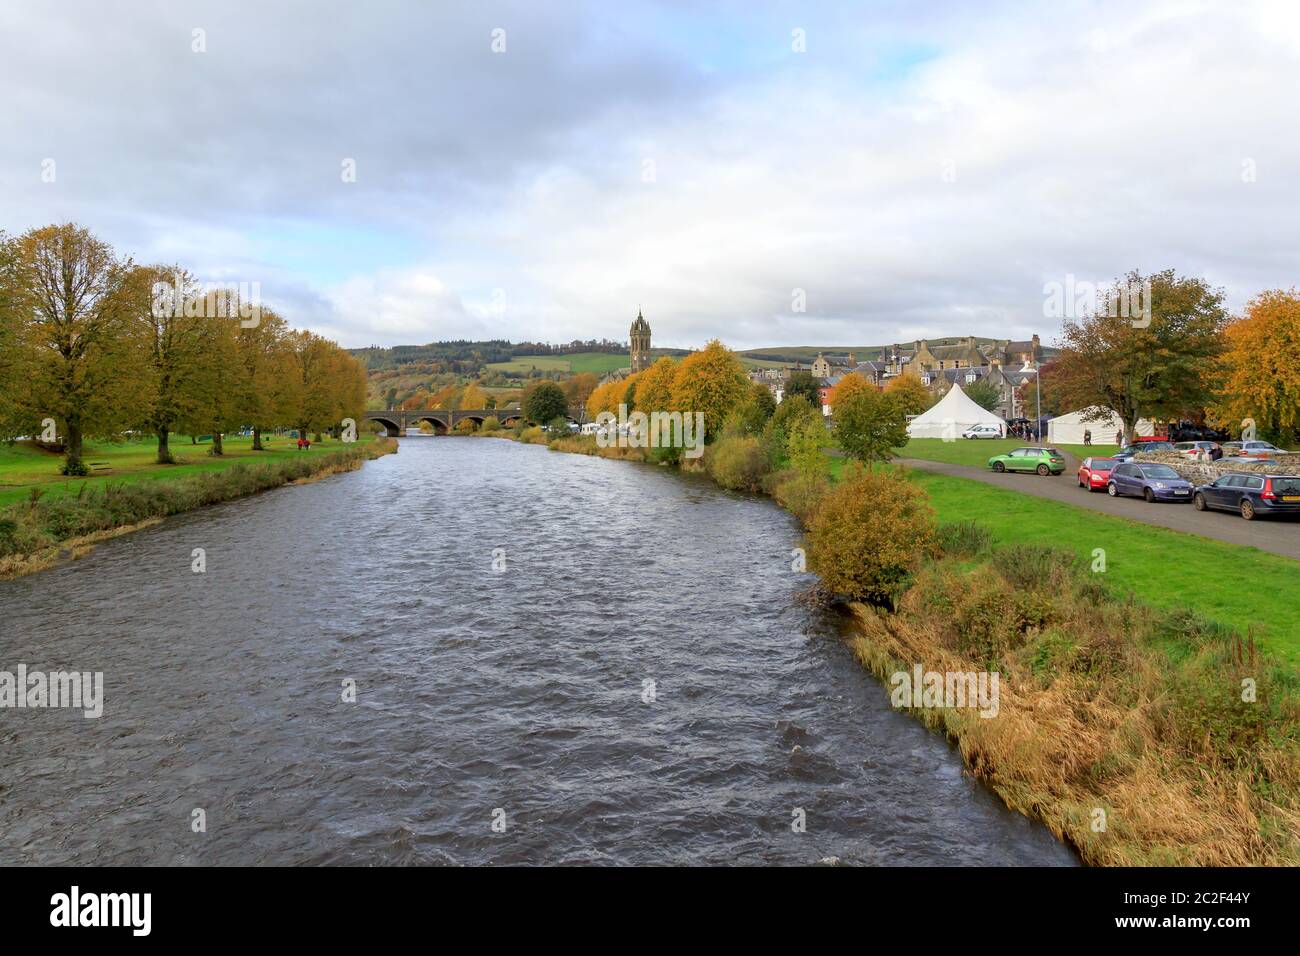 PEEBLES, SCOTLAND - OCTOBER 20, 2019: View down the River Tweed with trees in autumn colour and Peebles Old Parish Church Tower in the distance Stock Photo